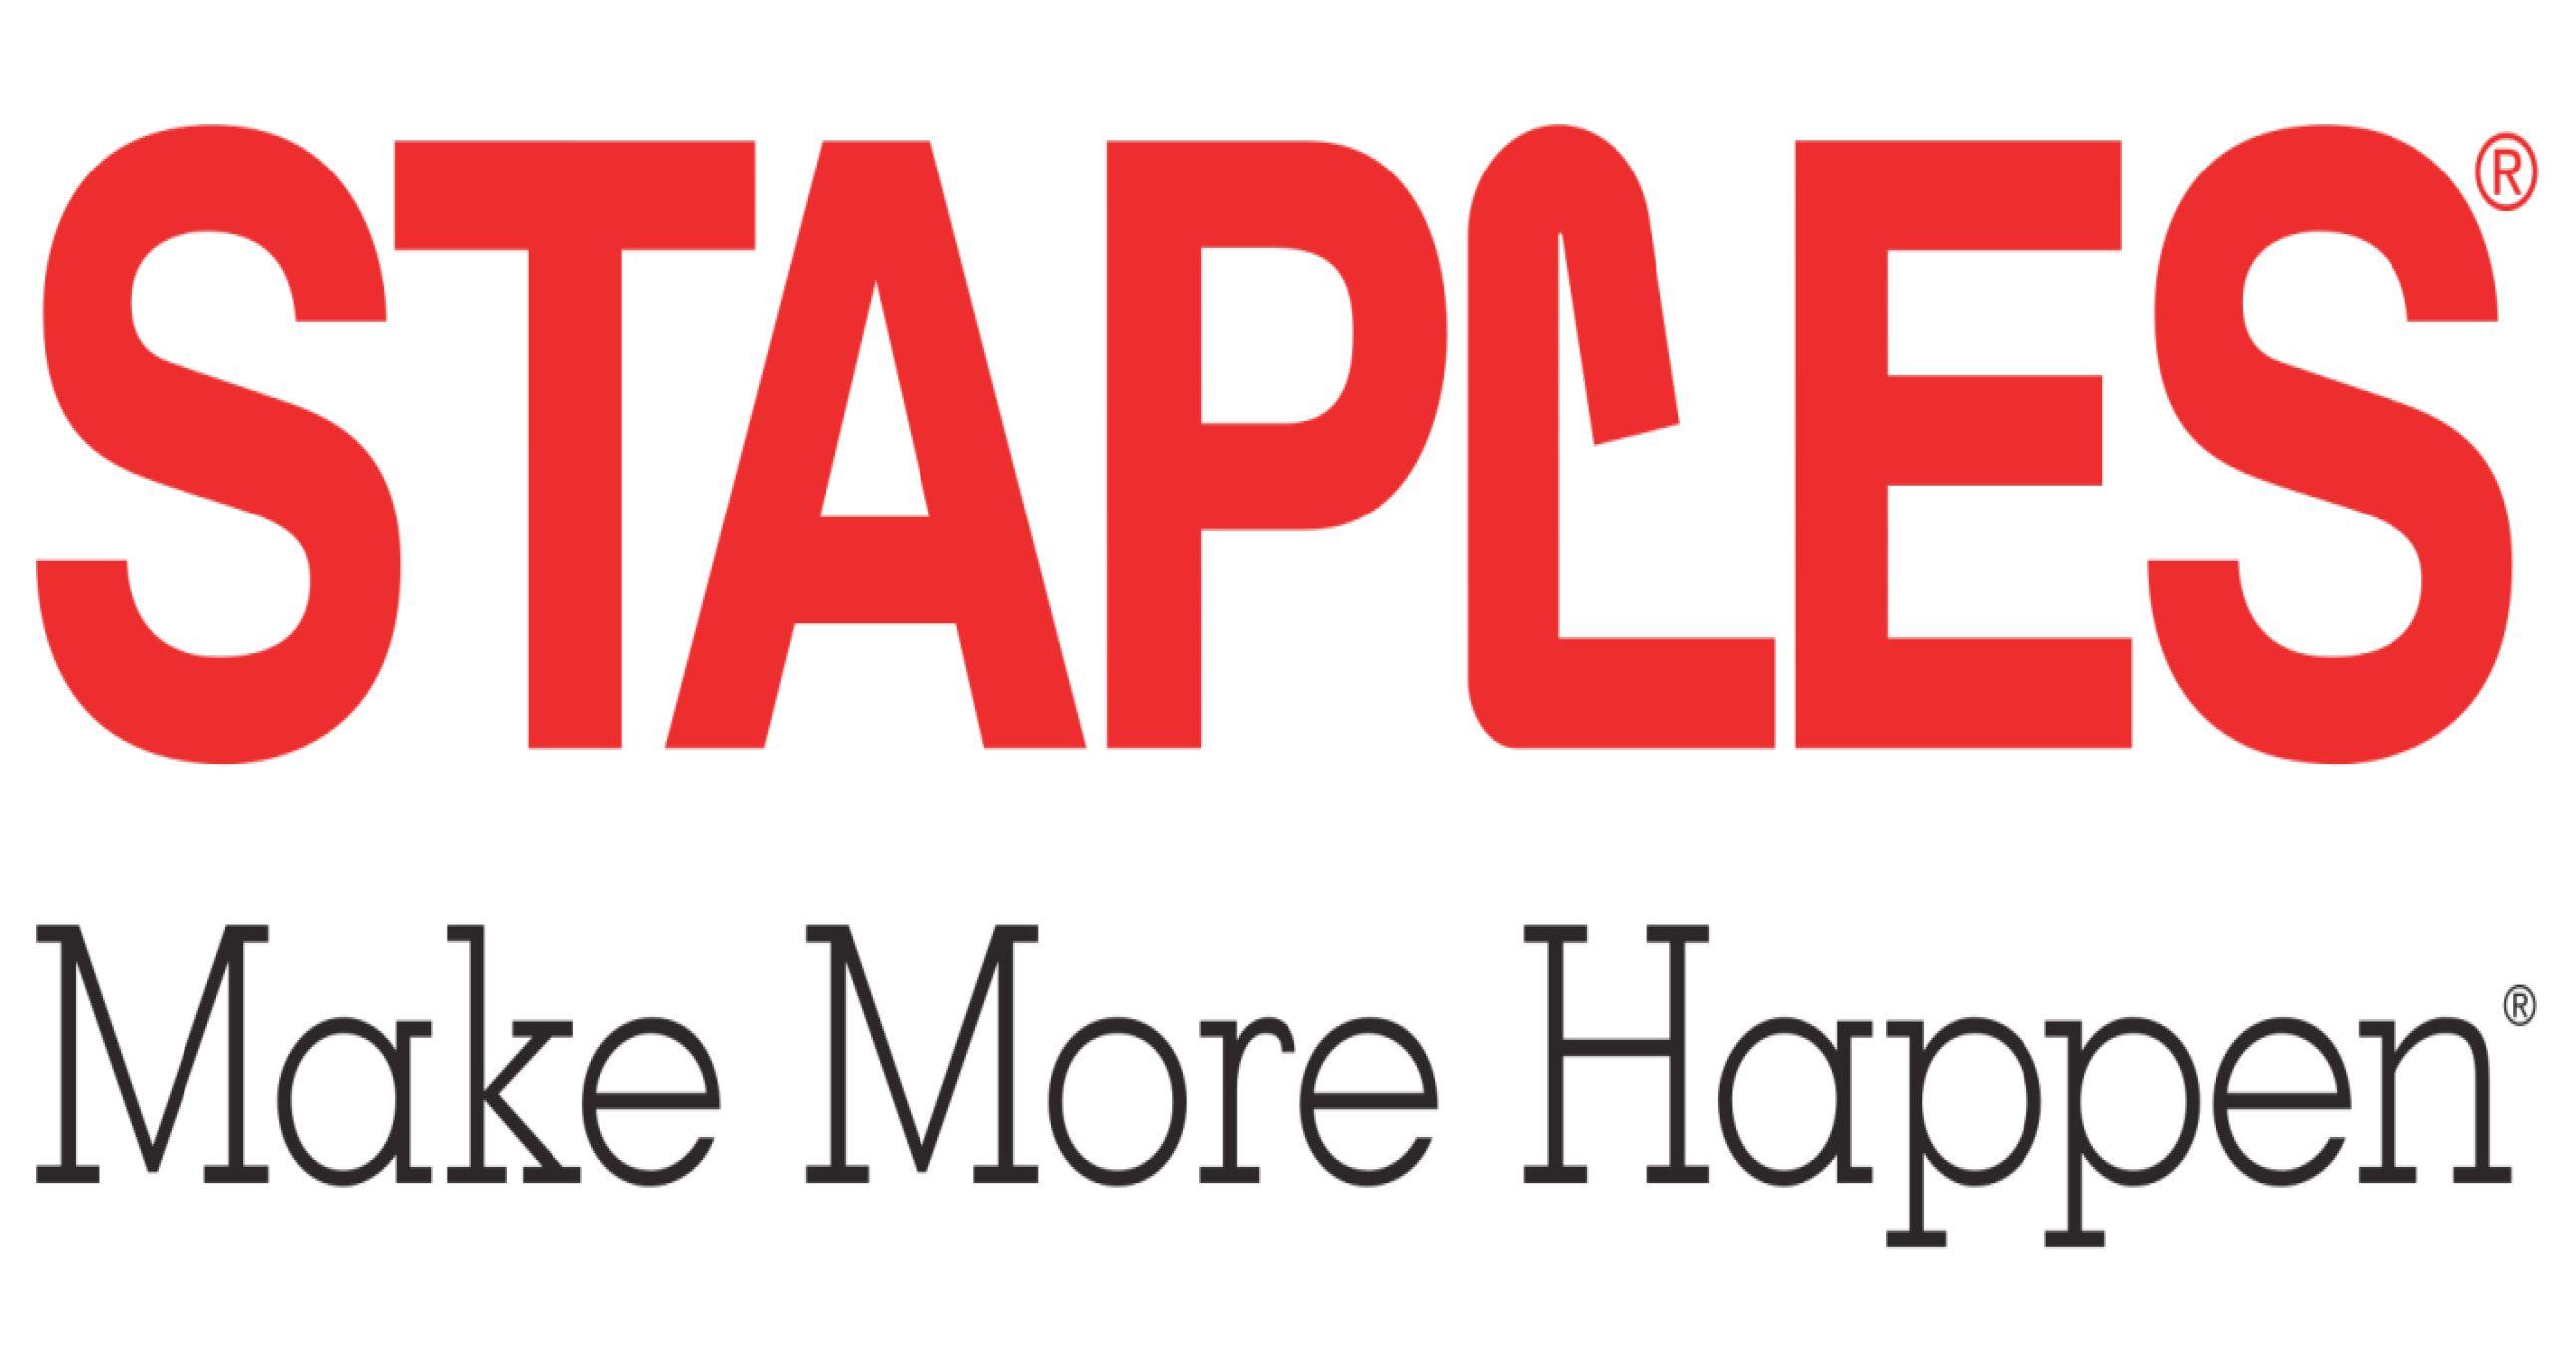 Make More Happen Staples Logo - Staples Print and Marketing Center will be having some amazing deals ...